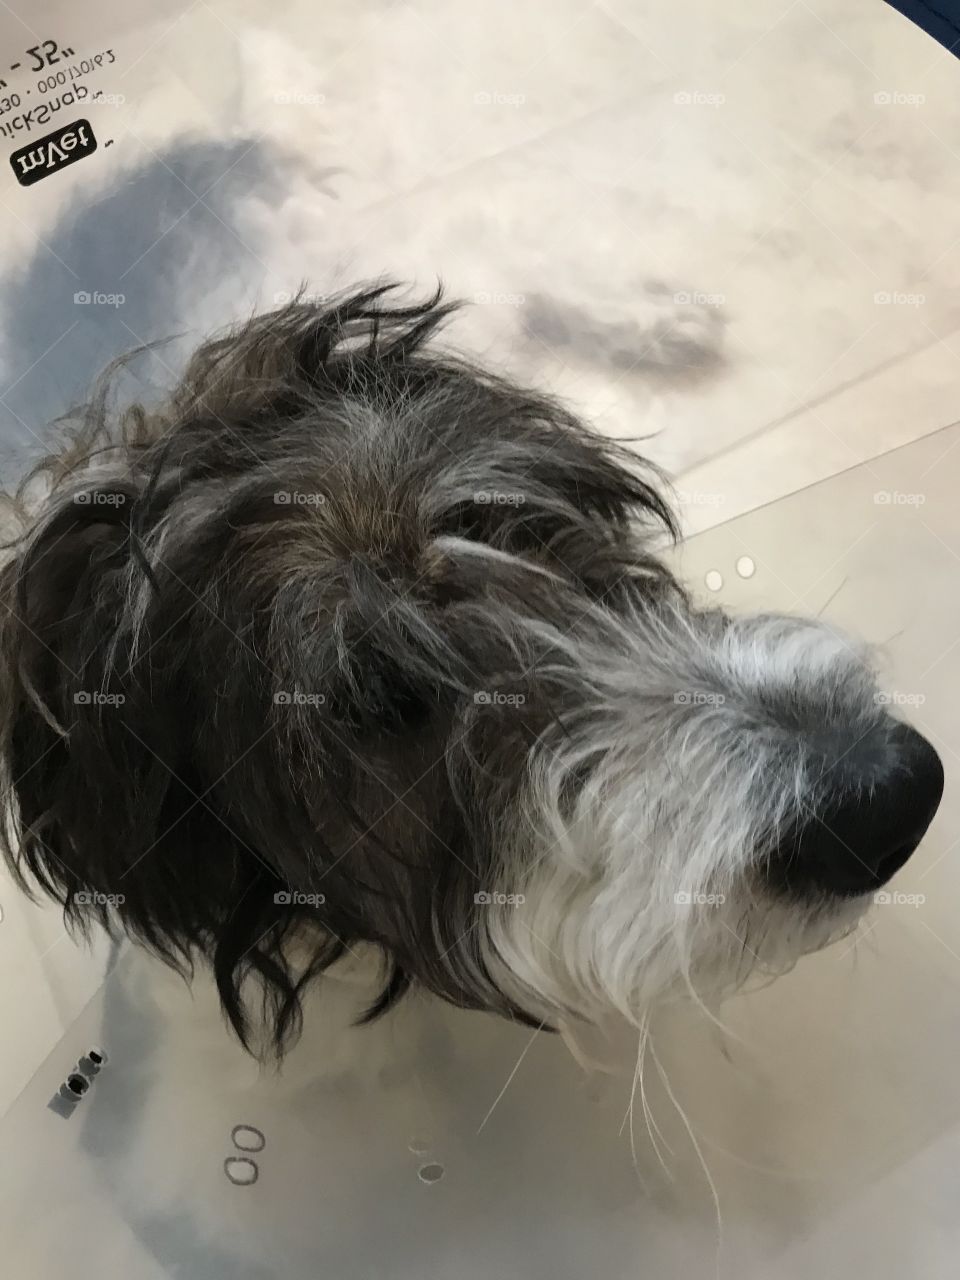 Six month old Pyredoodle dog head in Elizabethan collar after surgery.